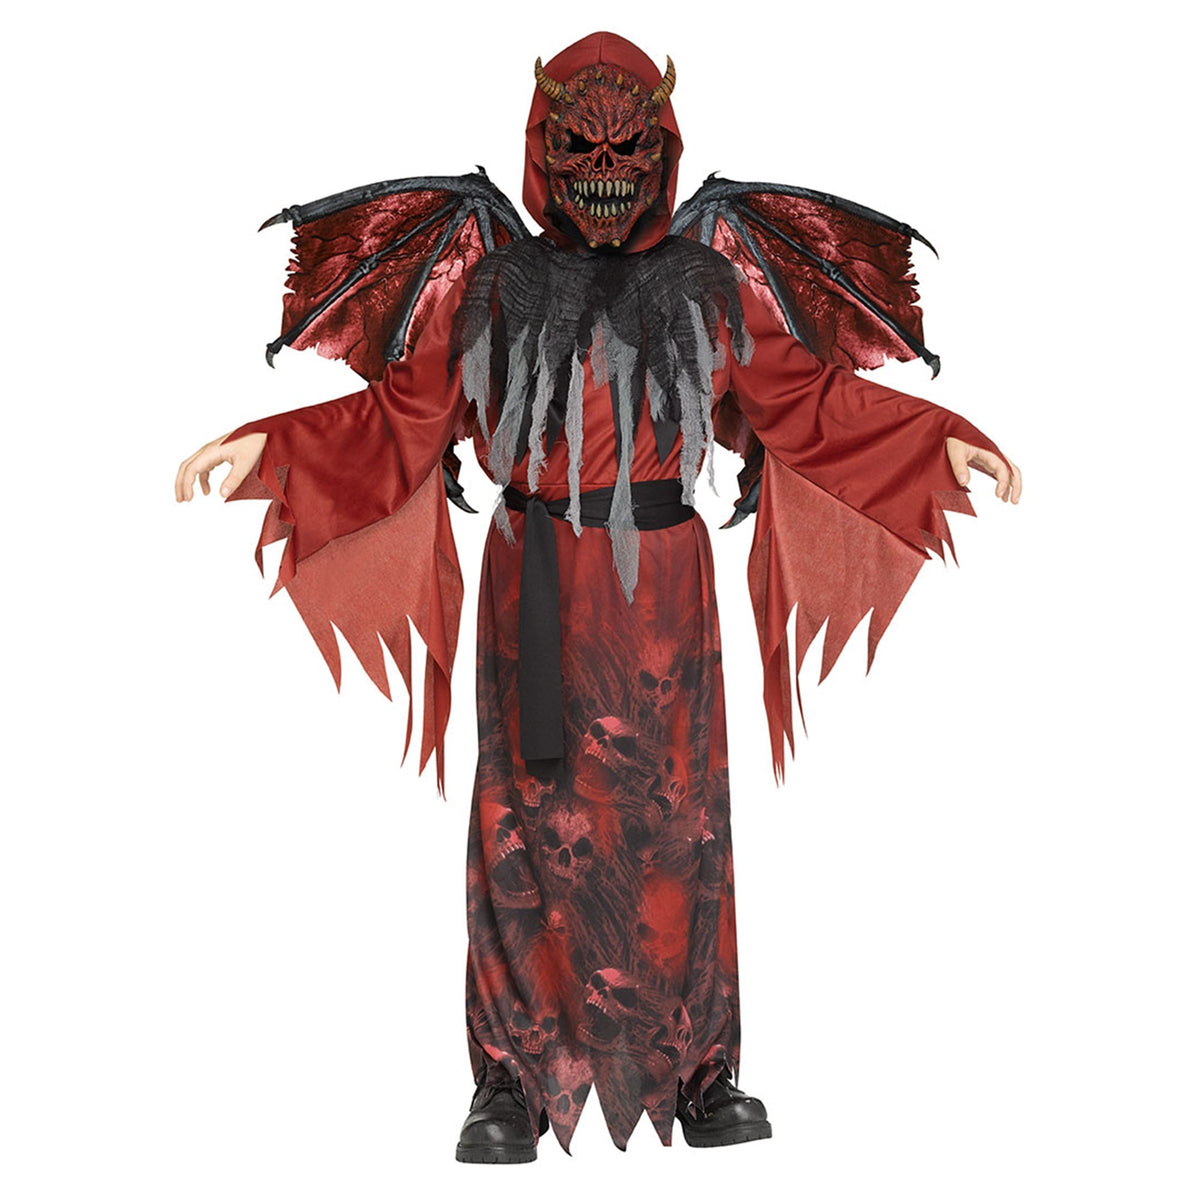 FUN WORLD Costumes Winged Demon Costume for Kids, Red Hooded Robe